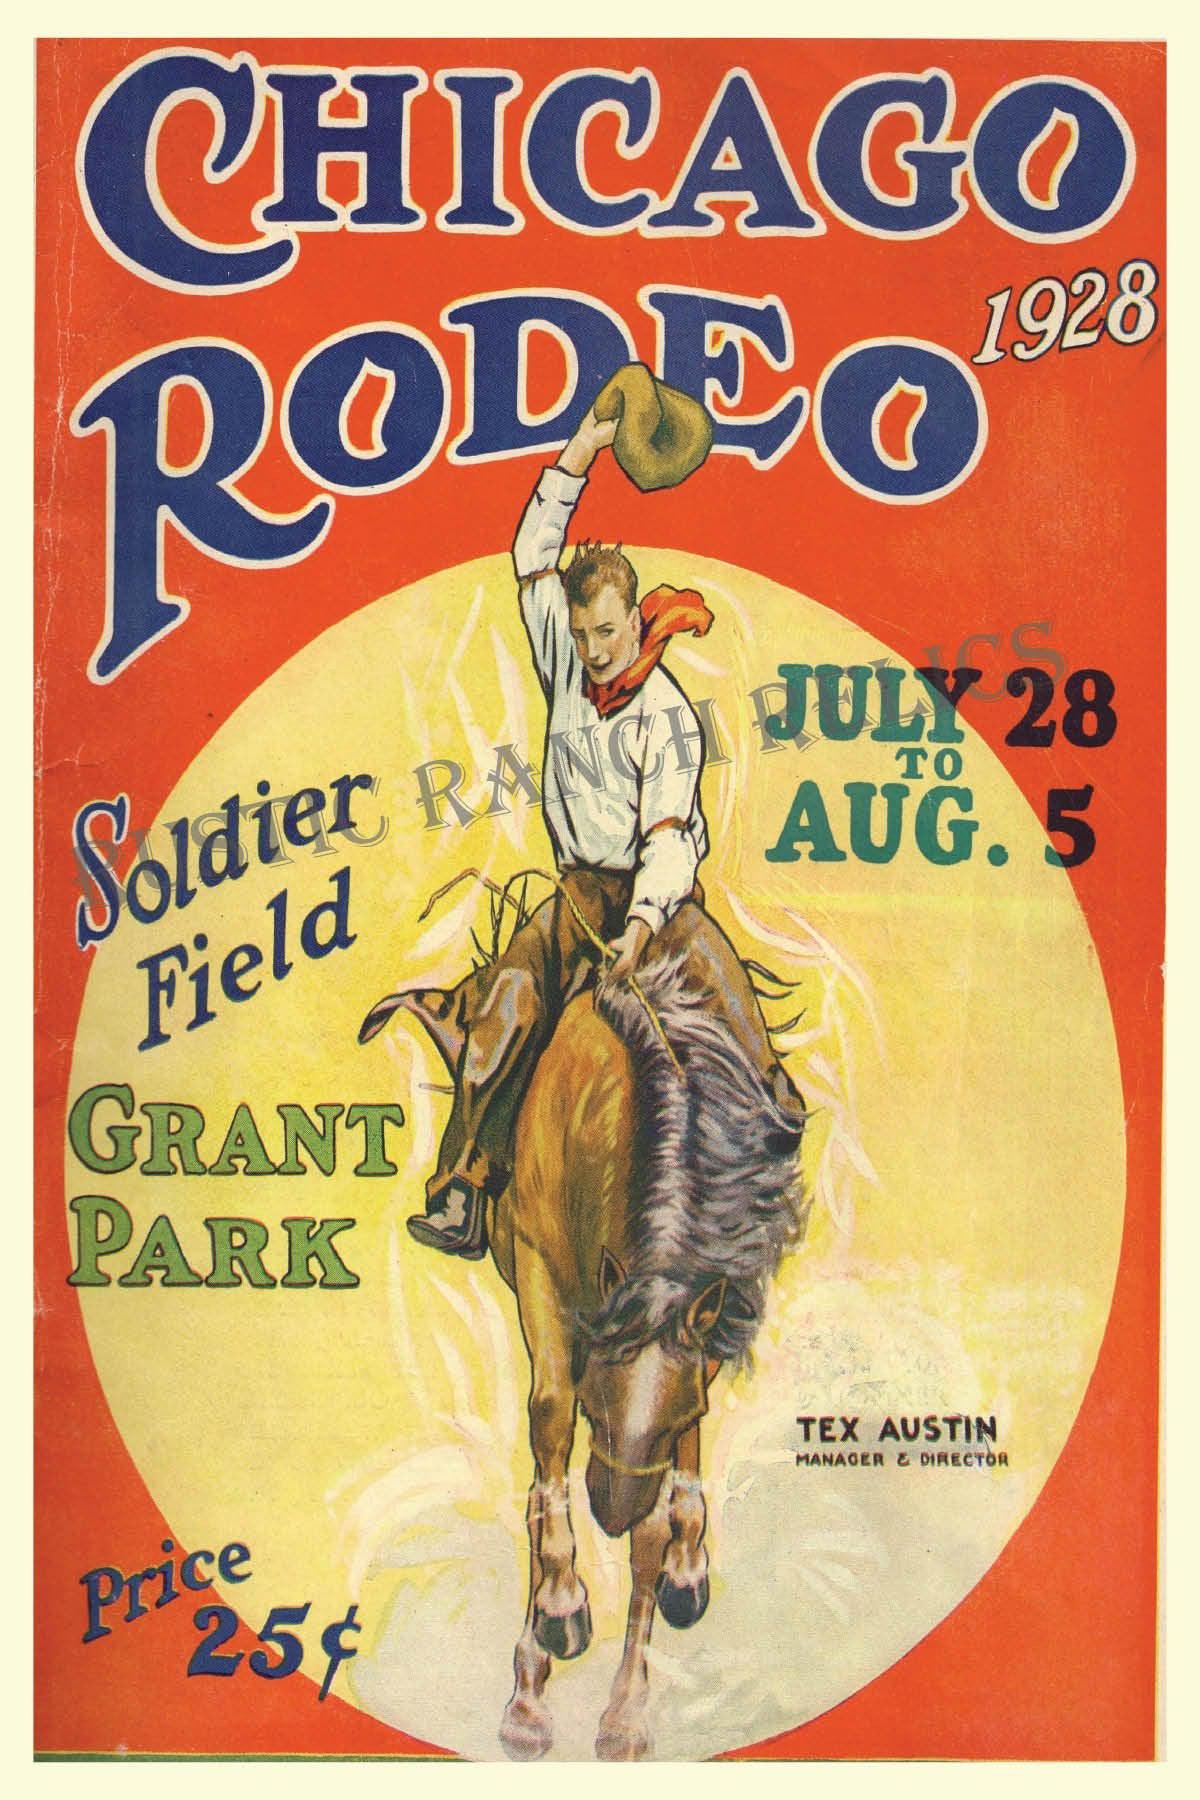 Chicago Rodeo 1928 - Vintage Rodeo Poster